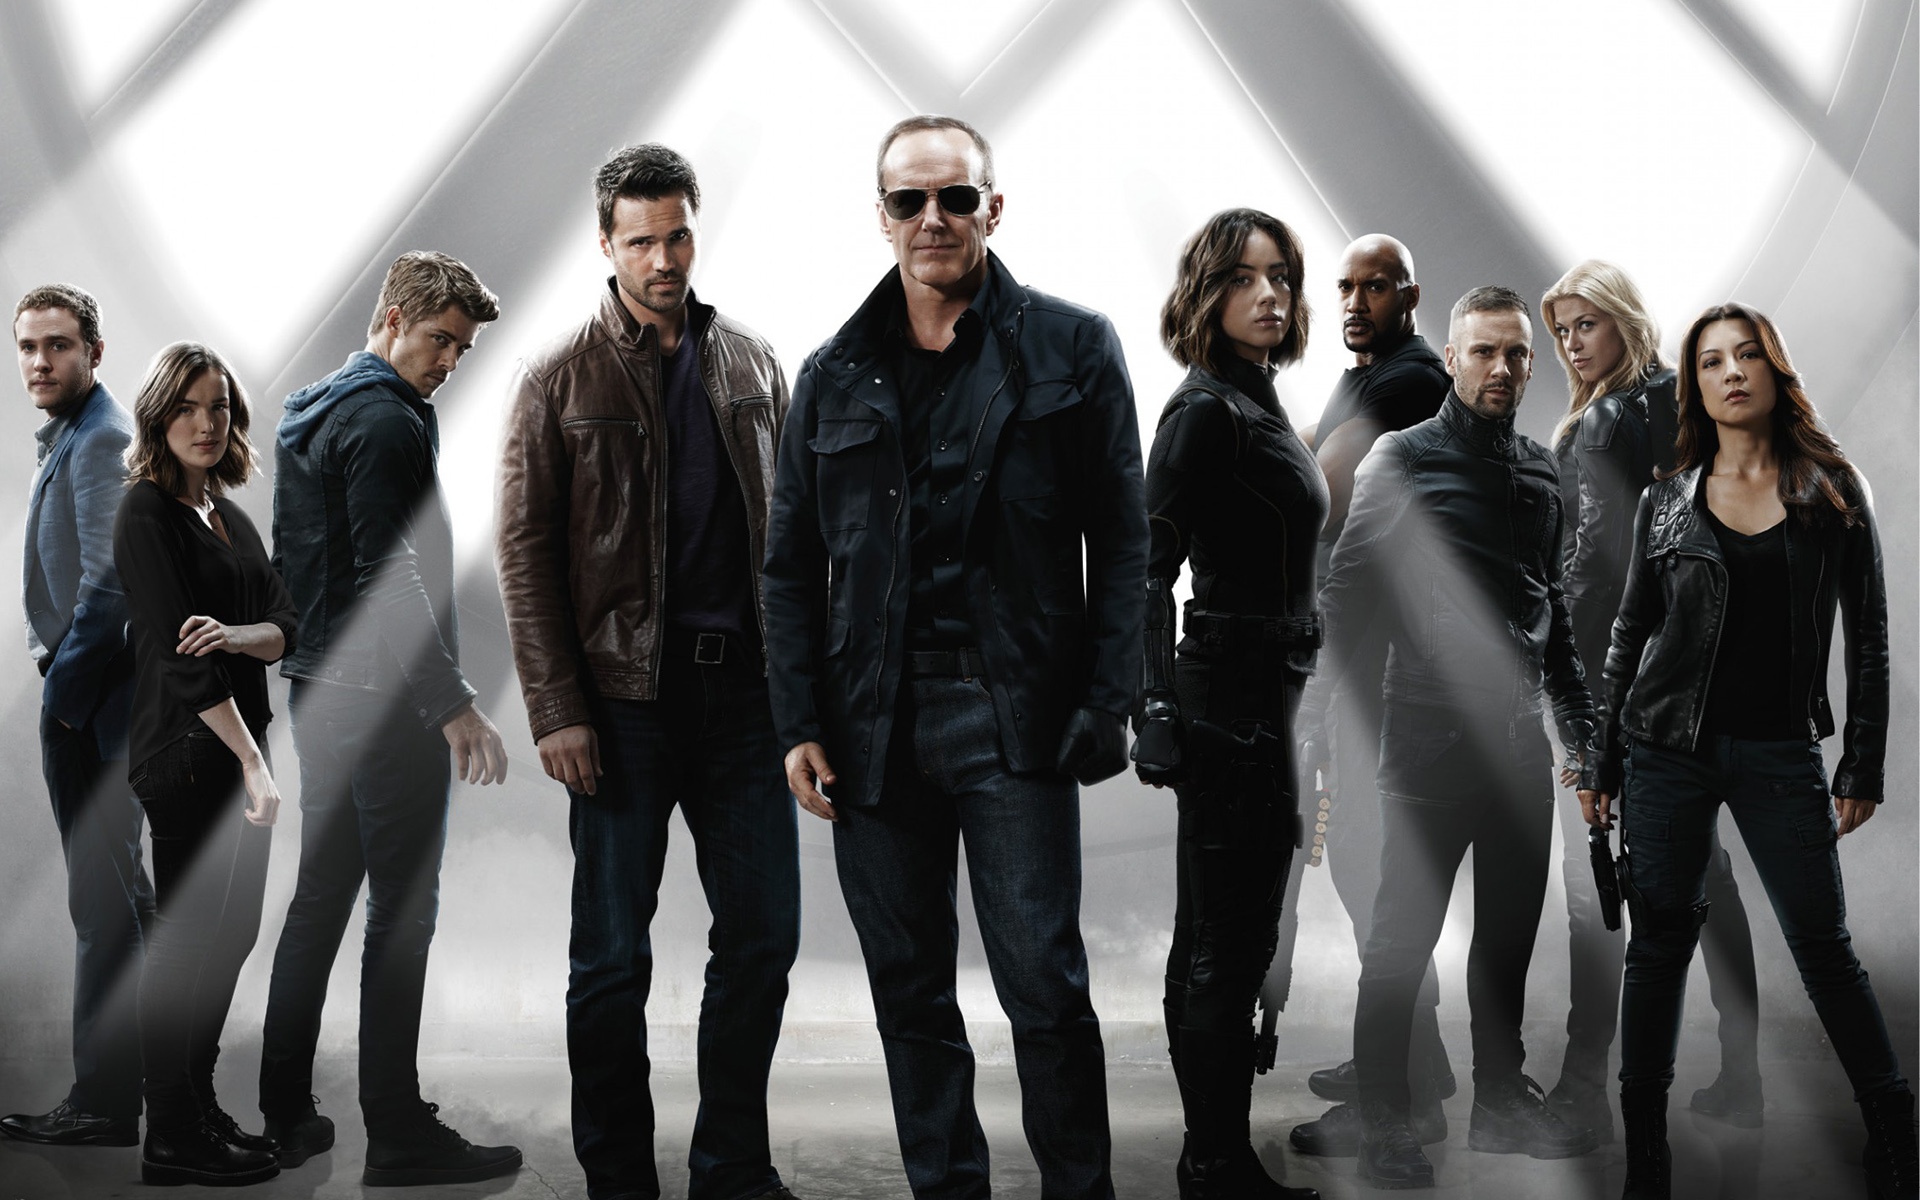 Agents Fitz & Simmons, Lincoln Campbell, Agents Ward & Coulson & Daisy (Skye) & Mack & Hunter & Morse & Melinda May (Yo-Yo's not shown, neither is the antagonist Talbot) http://www.cridutroll.fr/films-marvel-8-agents-shield-et-agent-carter/